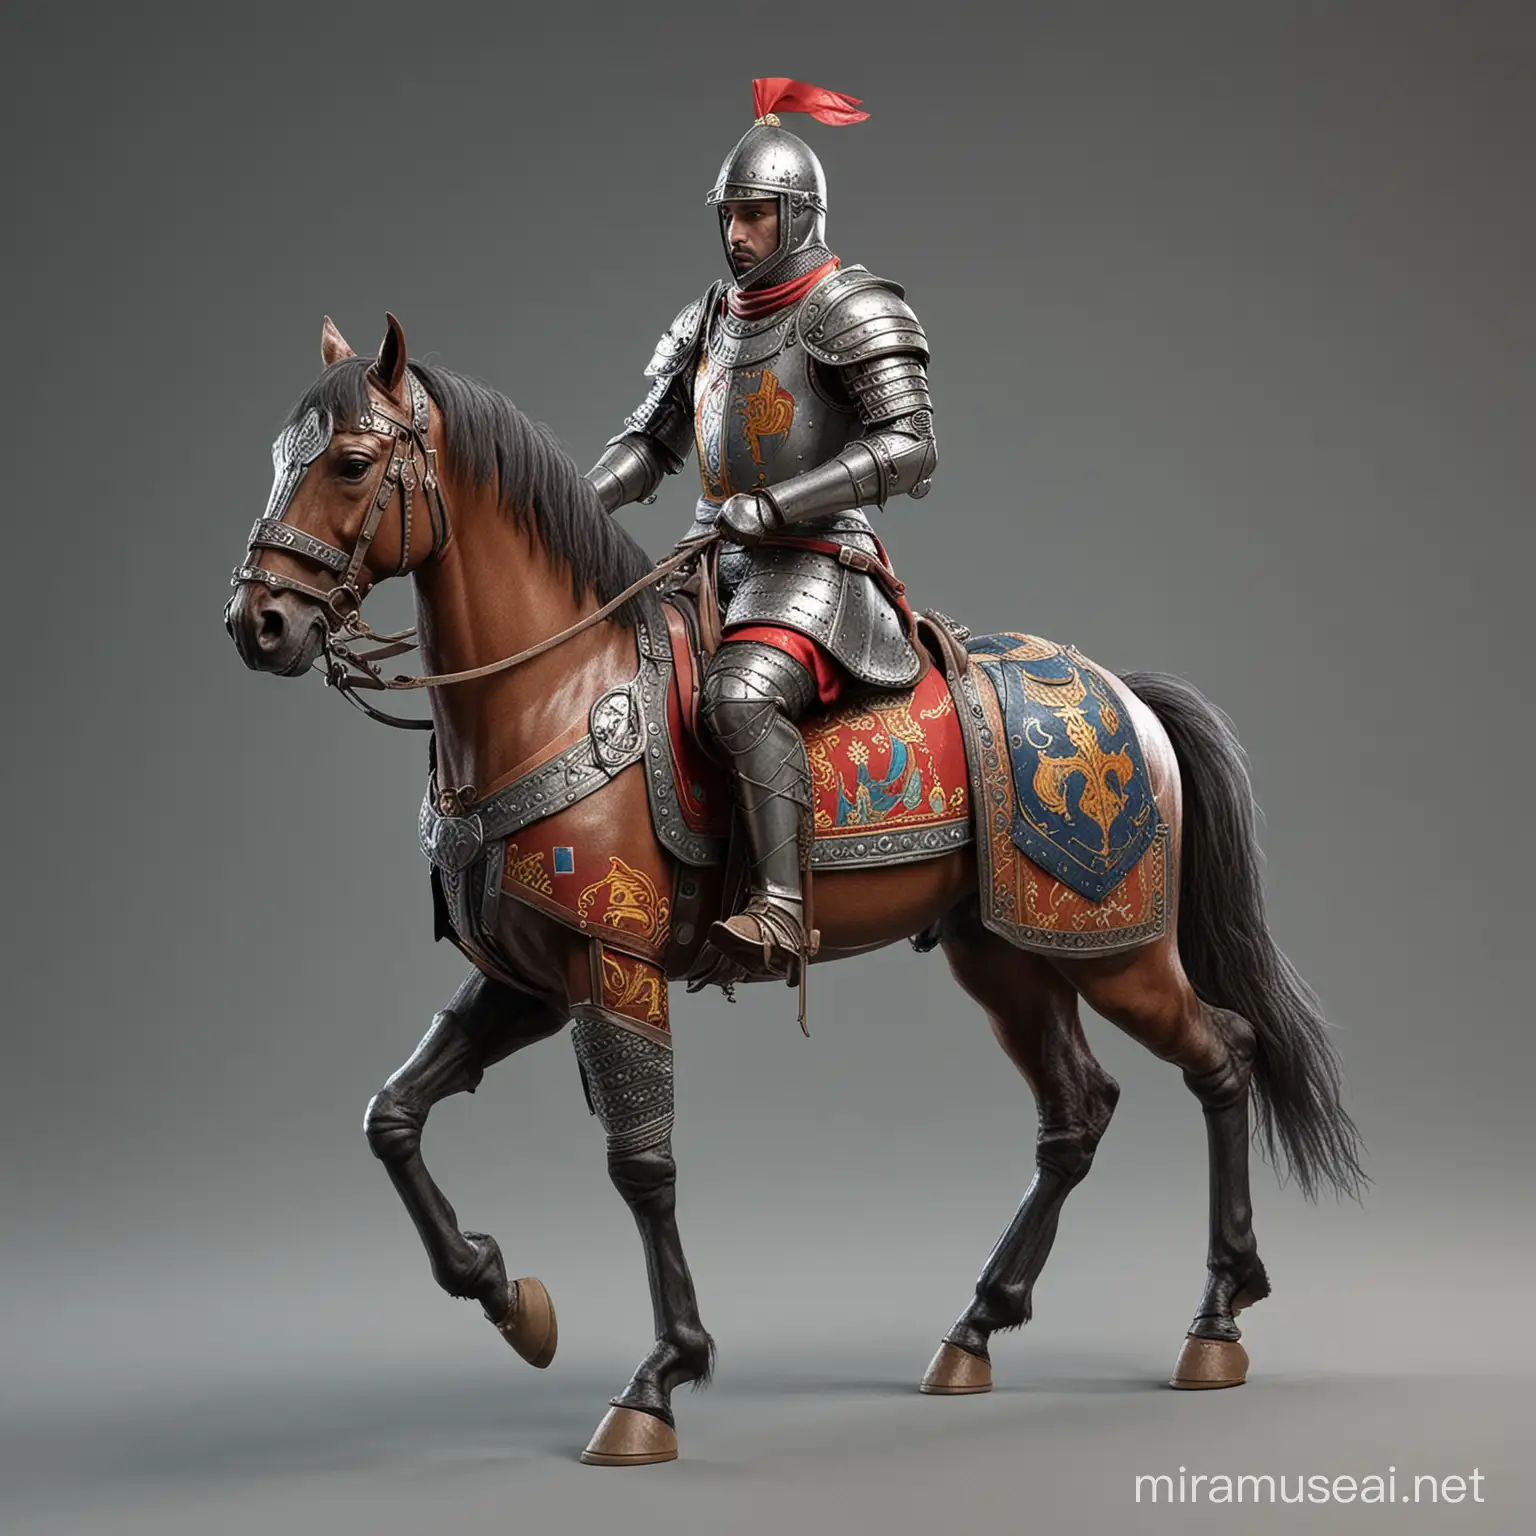 Made a knight from eastern countries on a horse